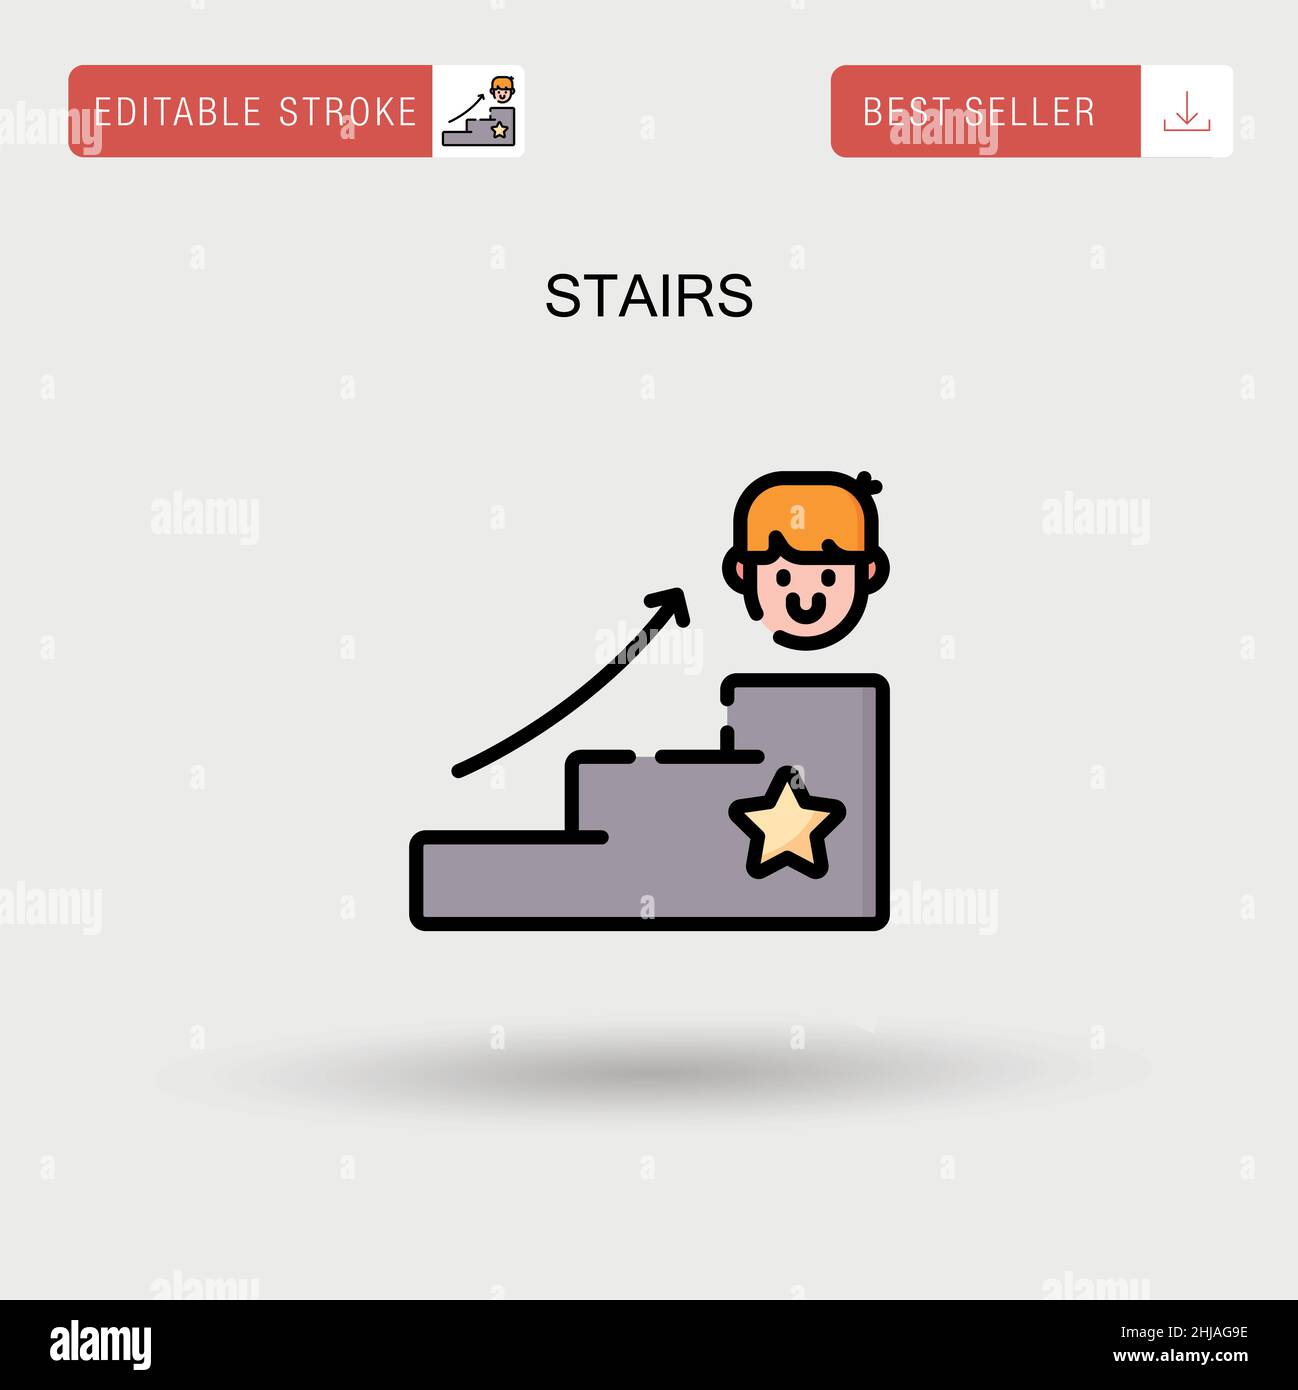 Stairs Simple vector icon. Stock Vector